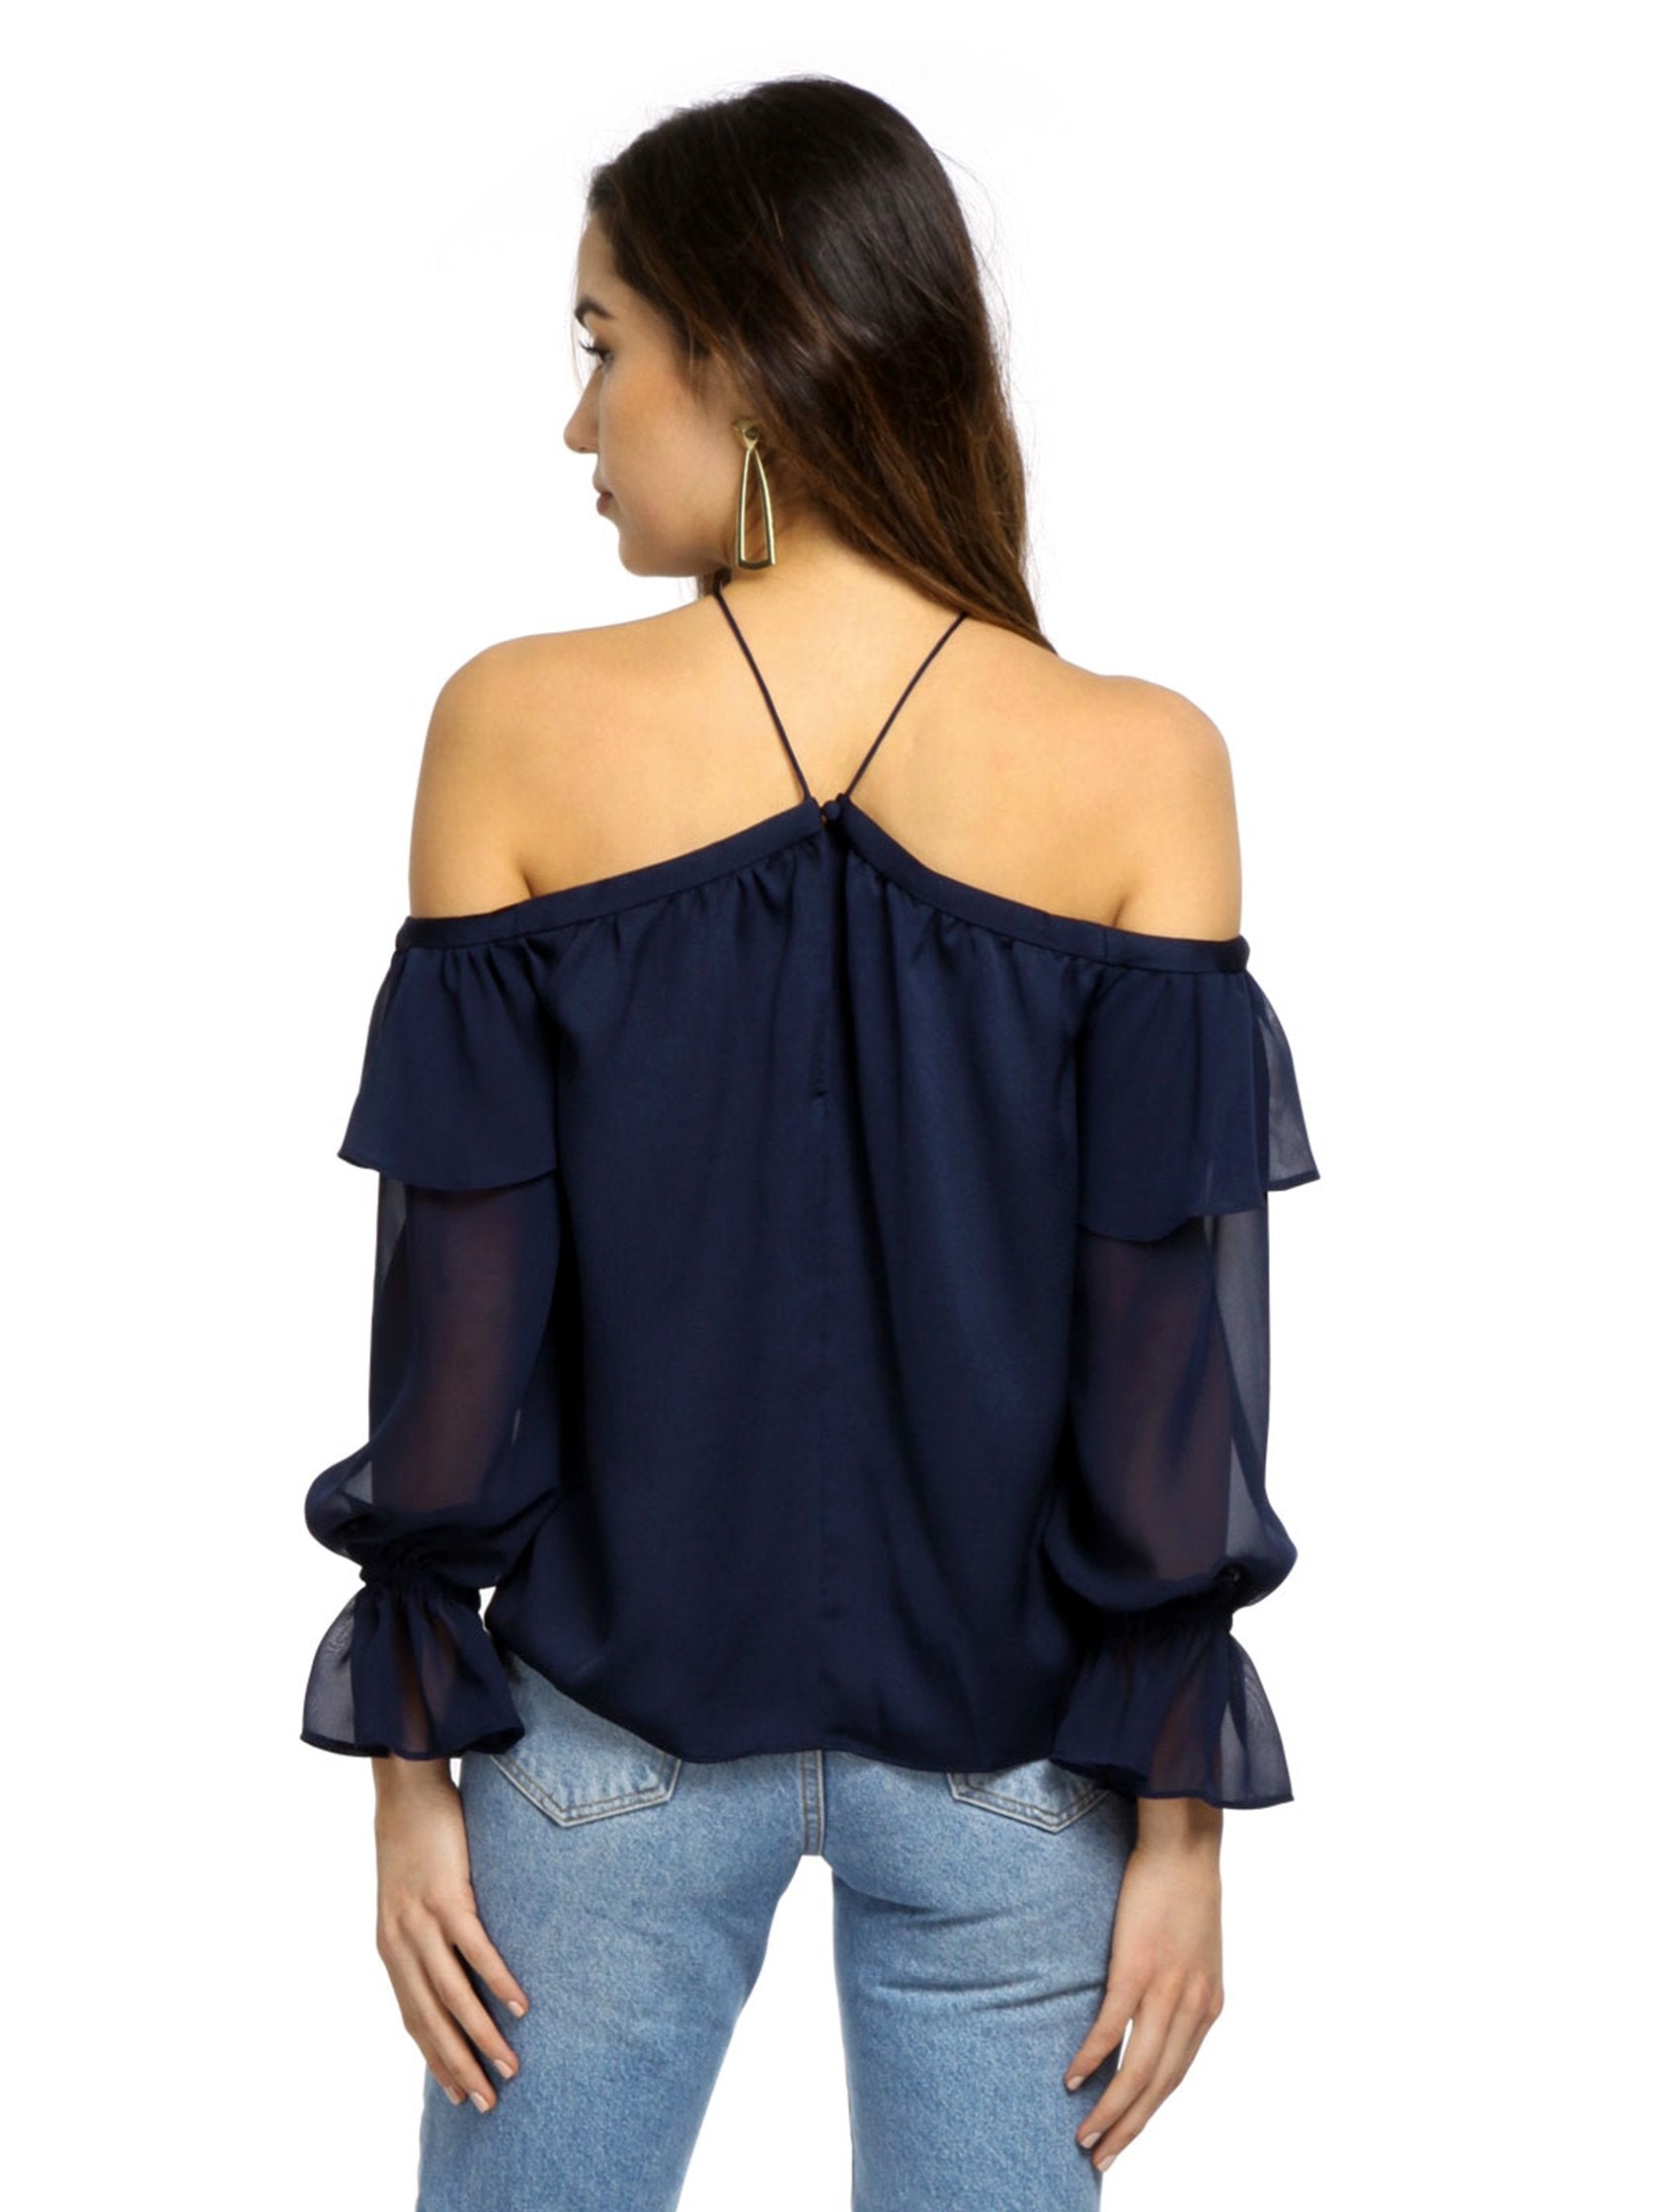 Women outfit in a top rental from 1.STATE called Cold Shoulder Halter Top